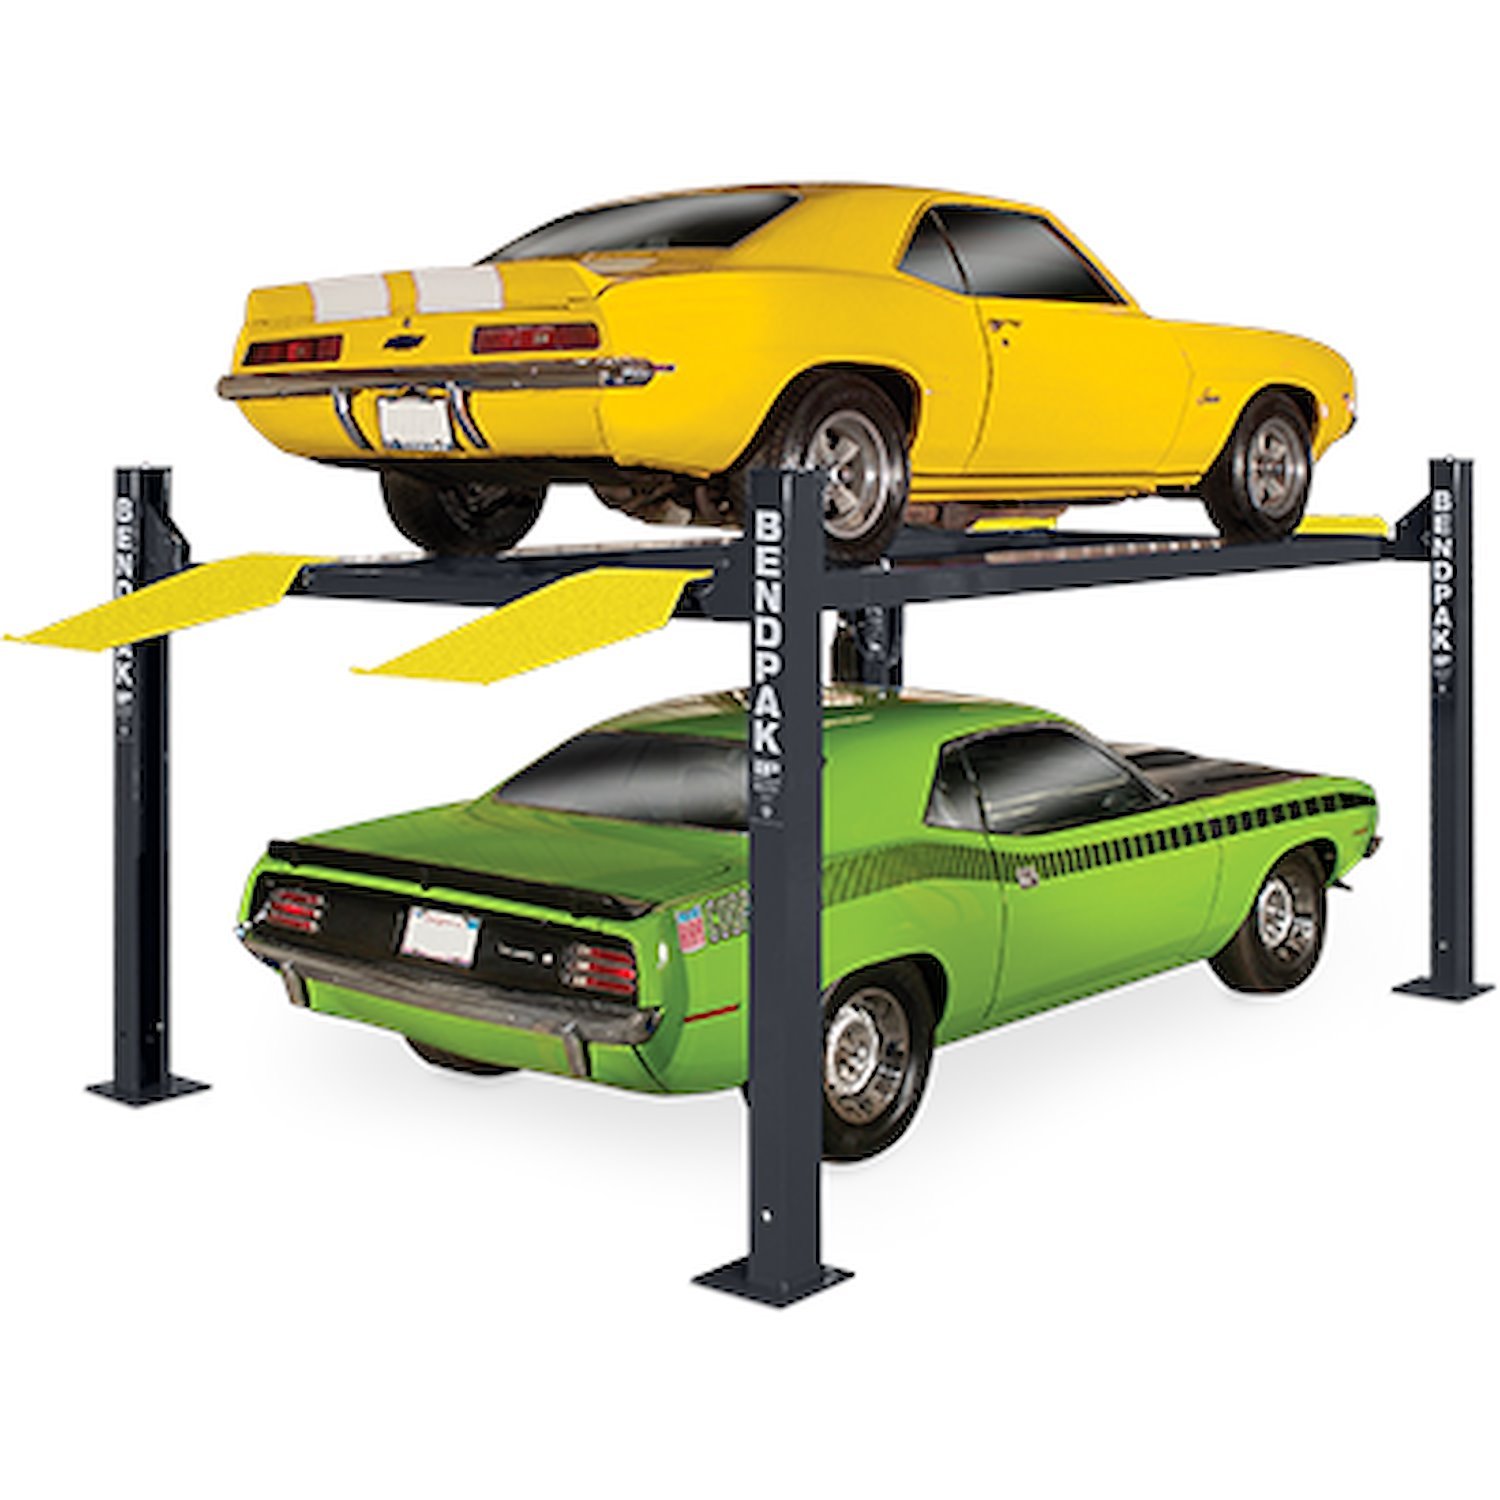 HD-9XL Extended-Length Four-Post Parking Lift, 9,000-lb. Capacity